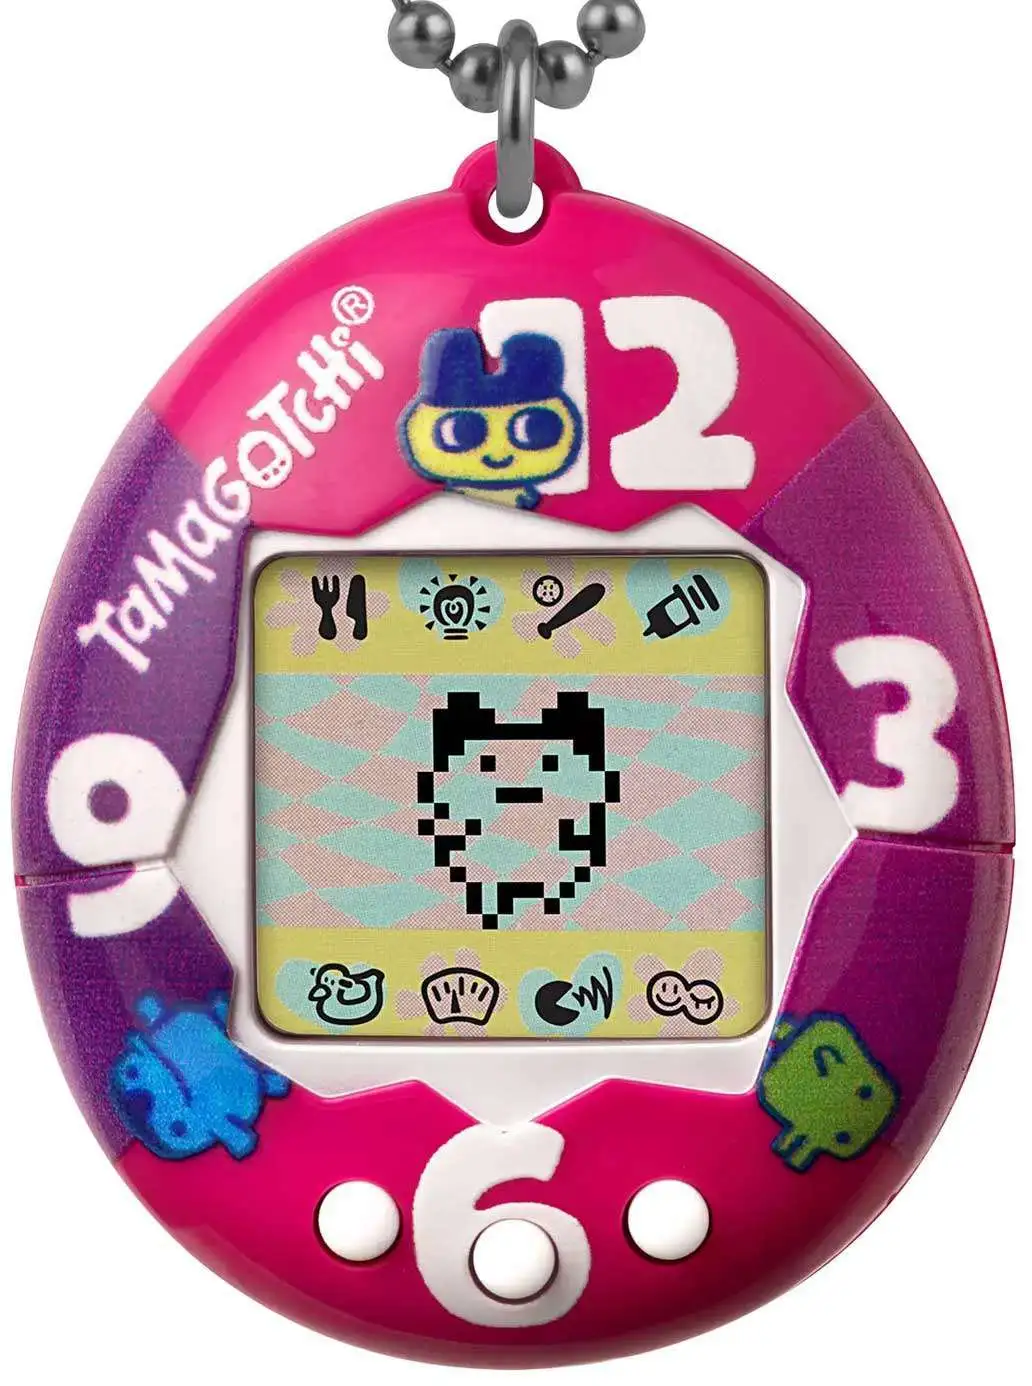 Original Tamagotchi Majestic Gen1 Exactly the Same as in 1997 Official Release 